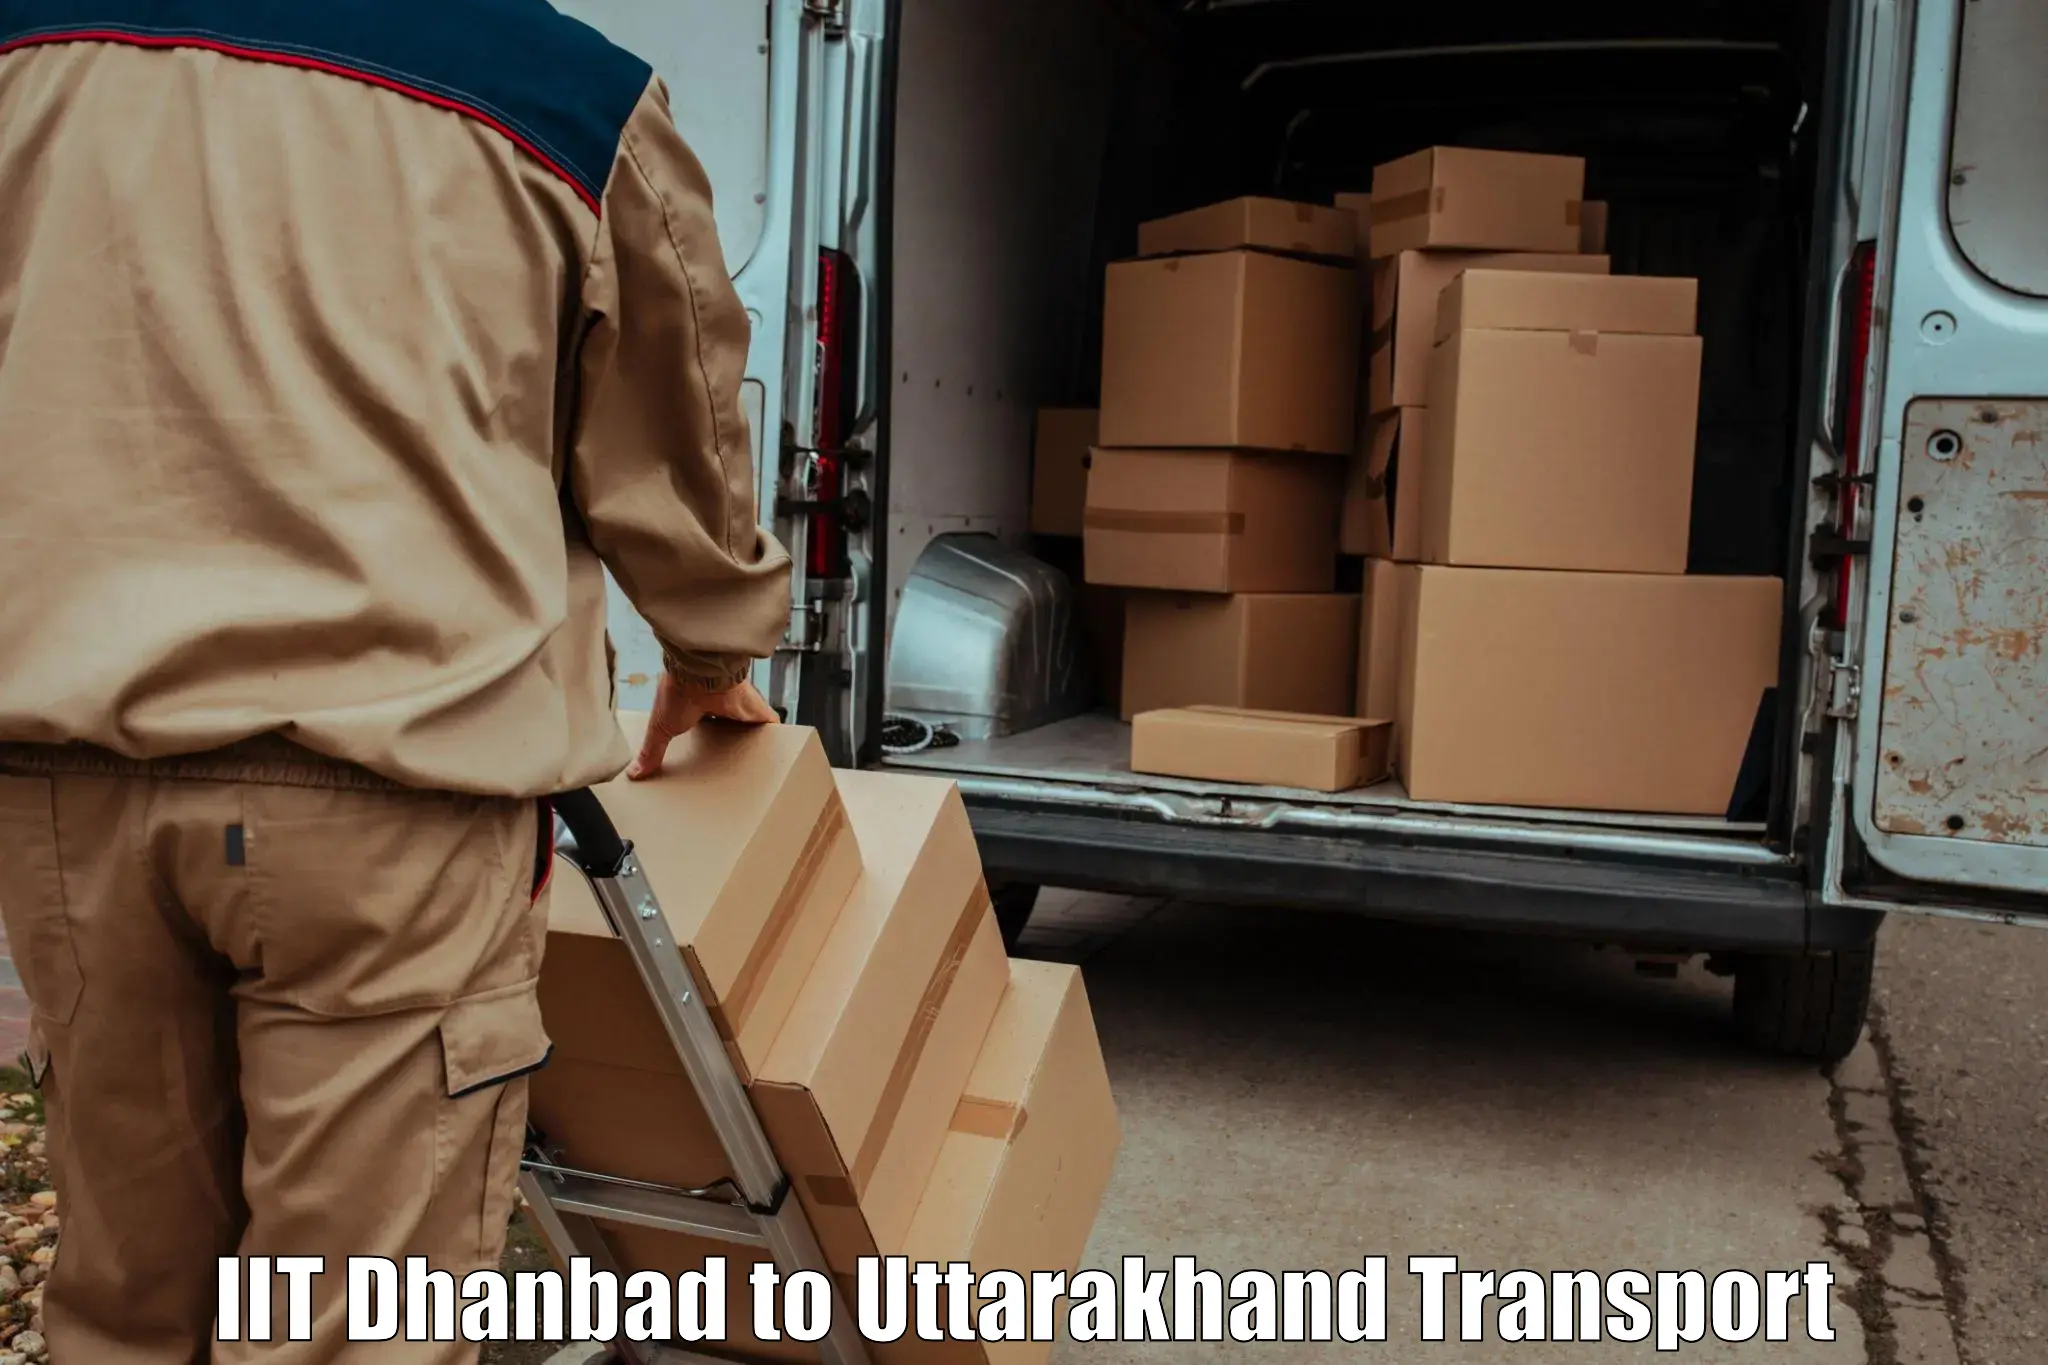 Daily parcel service transport IIT Dhanbad to Khatima